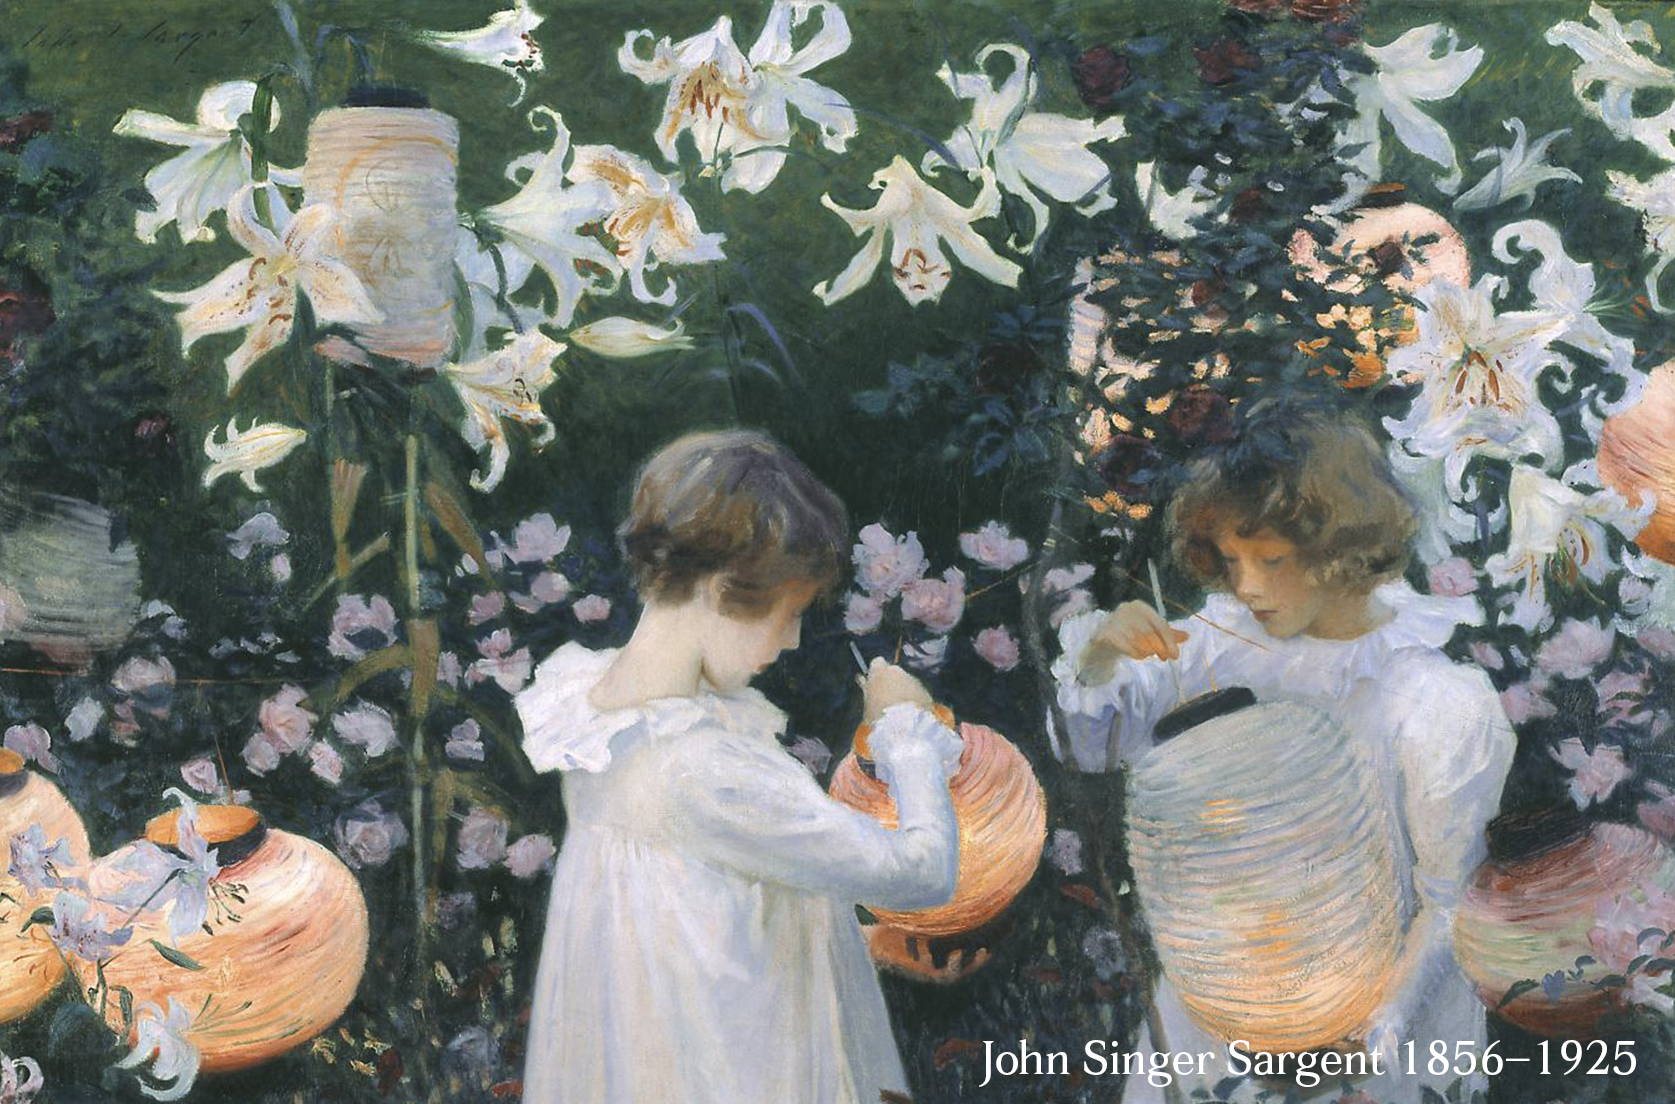 Oil on Canvas painting by John Singer Sargent of Lilies and Roses